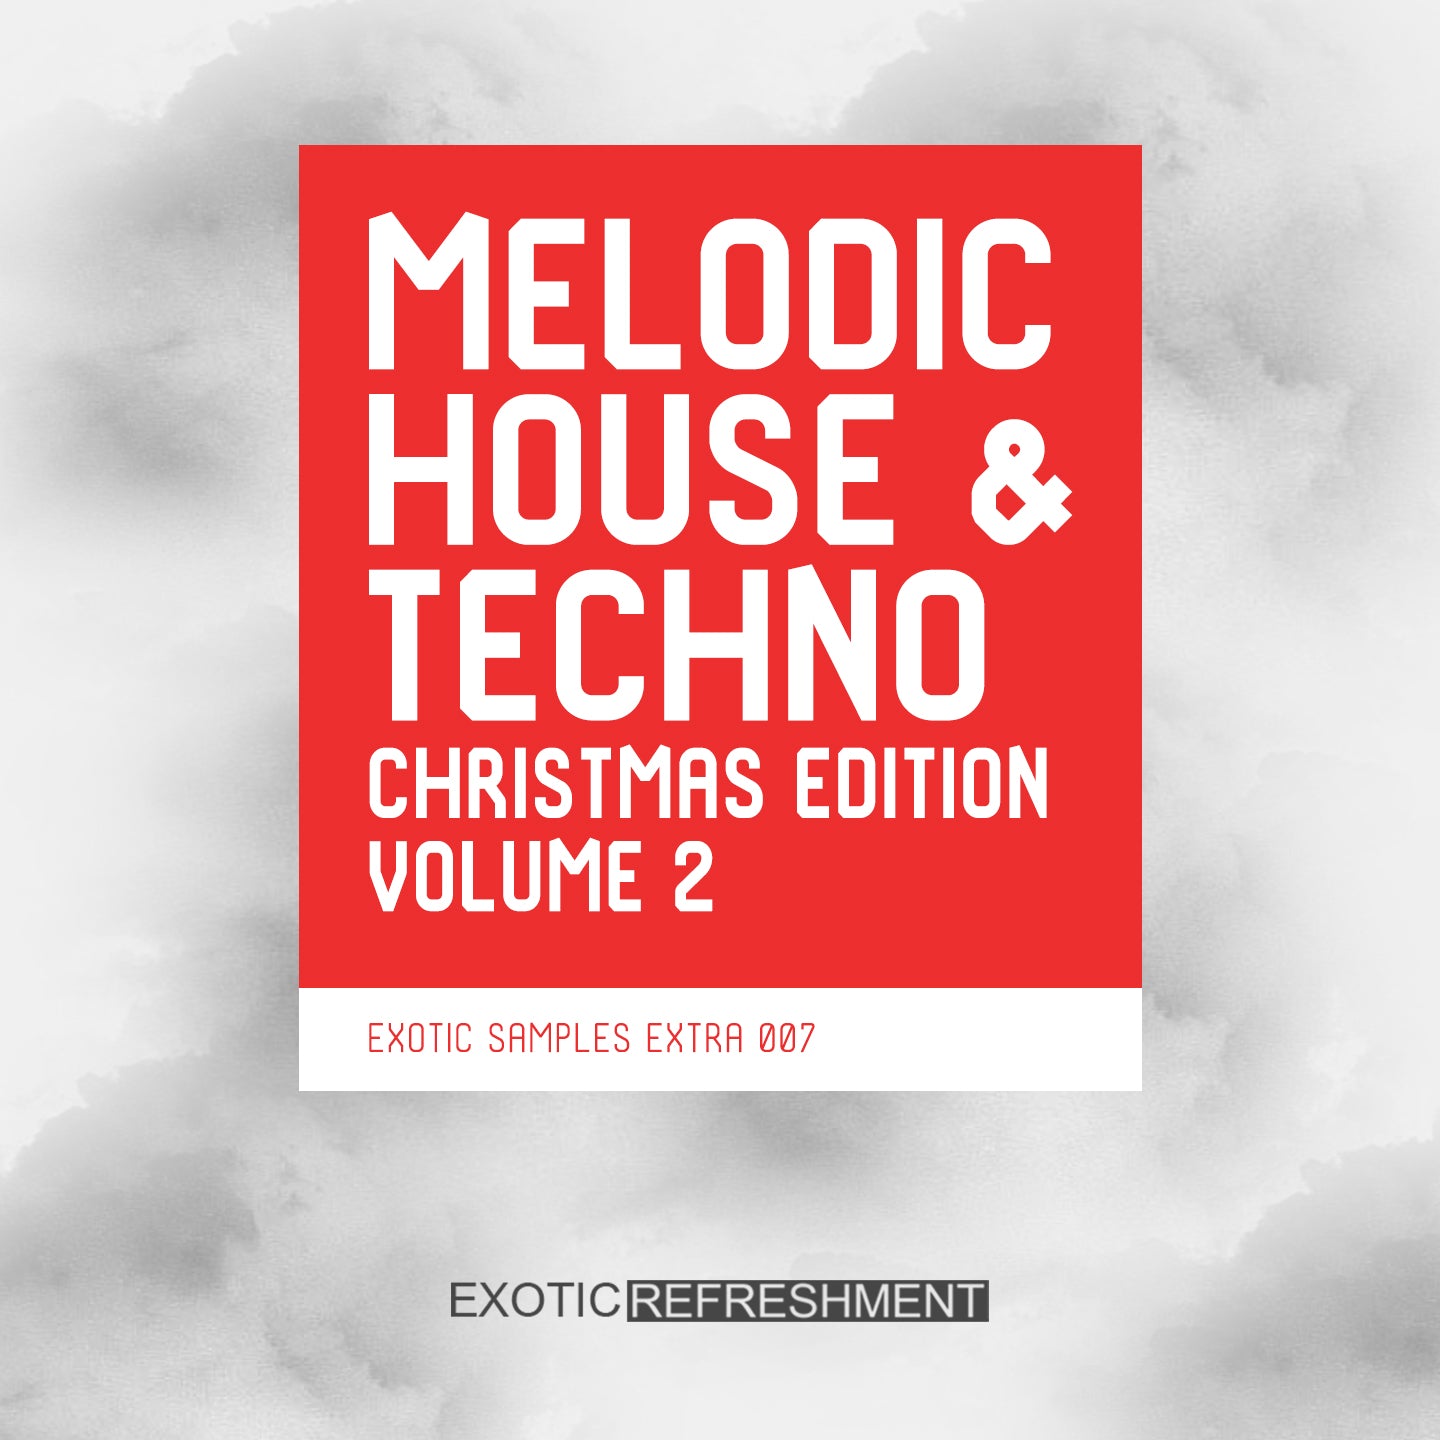 Melodic House & Techno Christmas Edition vol. 2 - Sample Pack